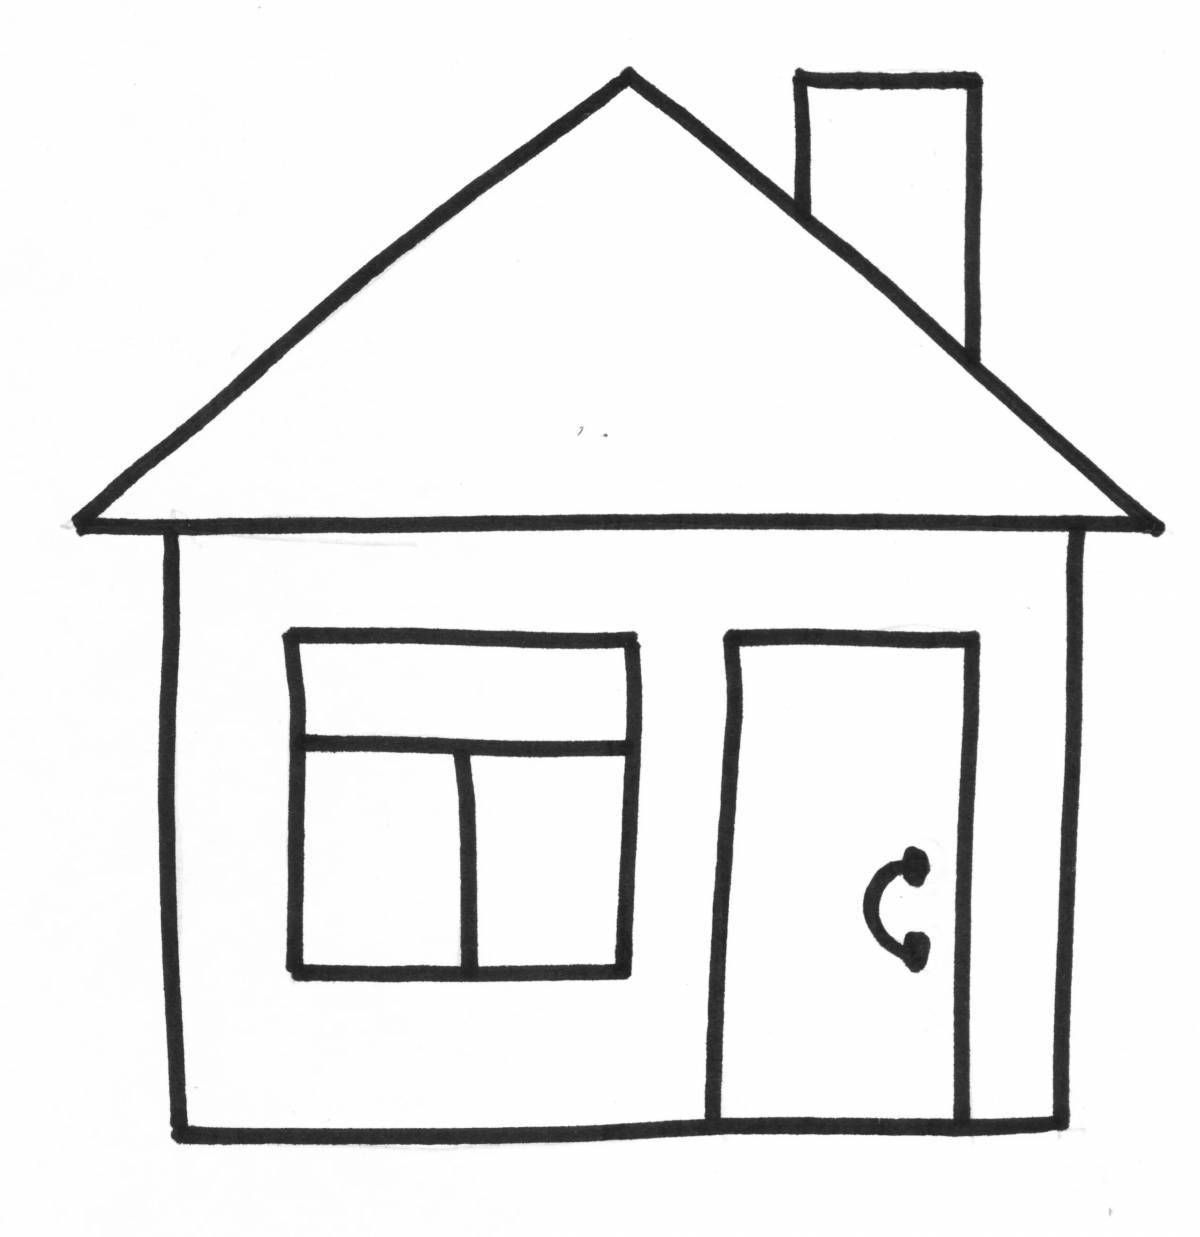 Adorable house coloring page for 2-3 year olds